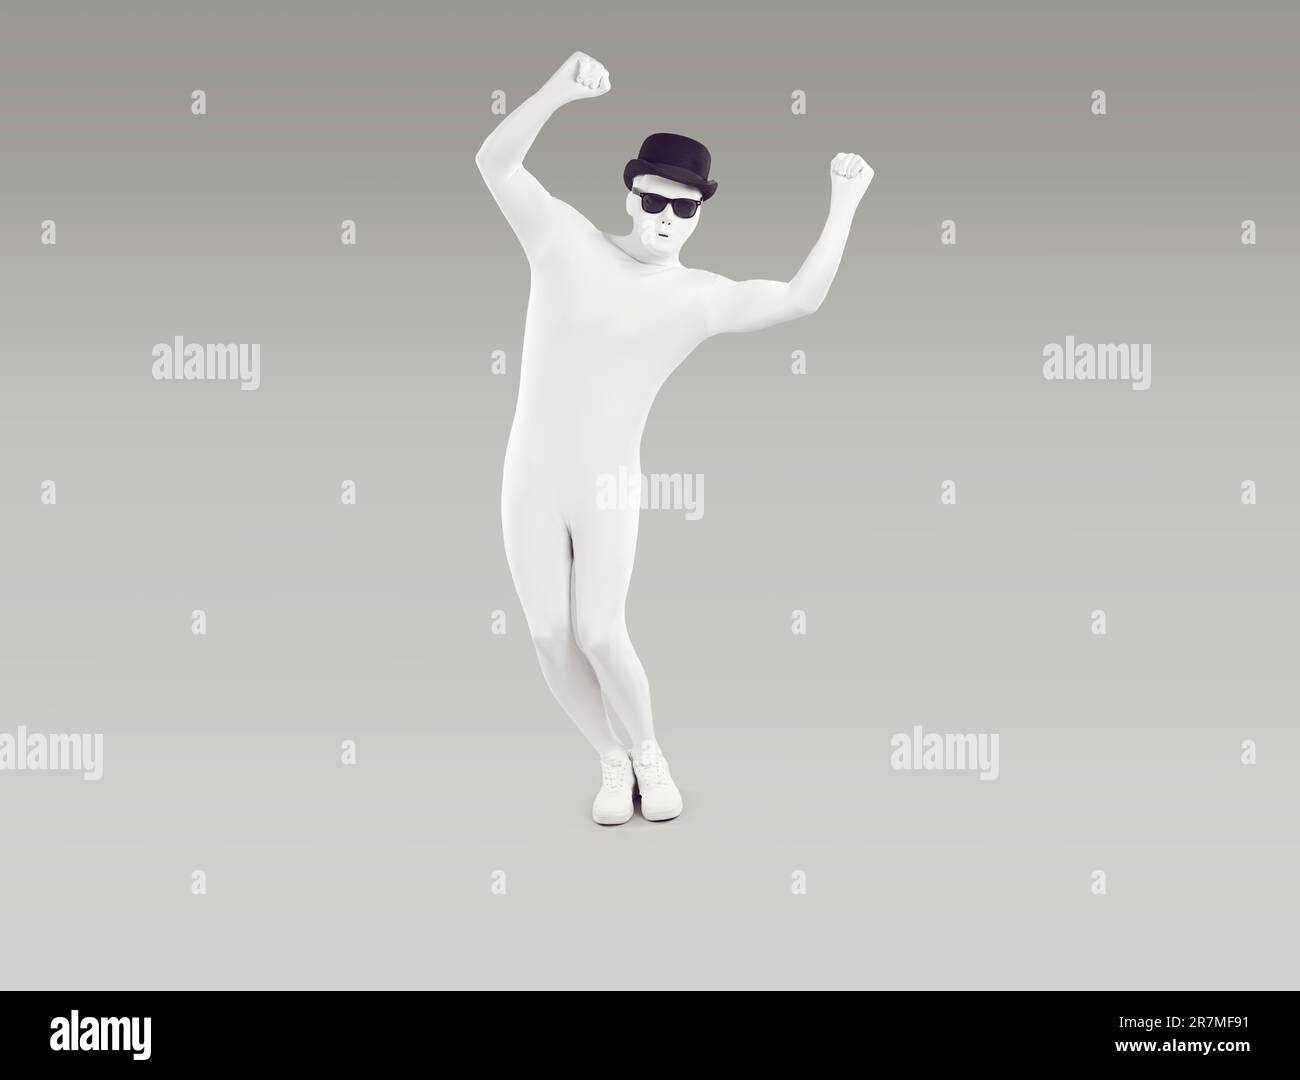 Unknown person dressed in white leotard dancing with his hands raised Stock Photo